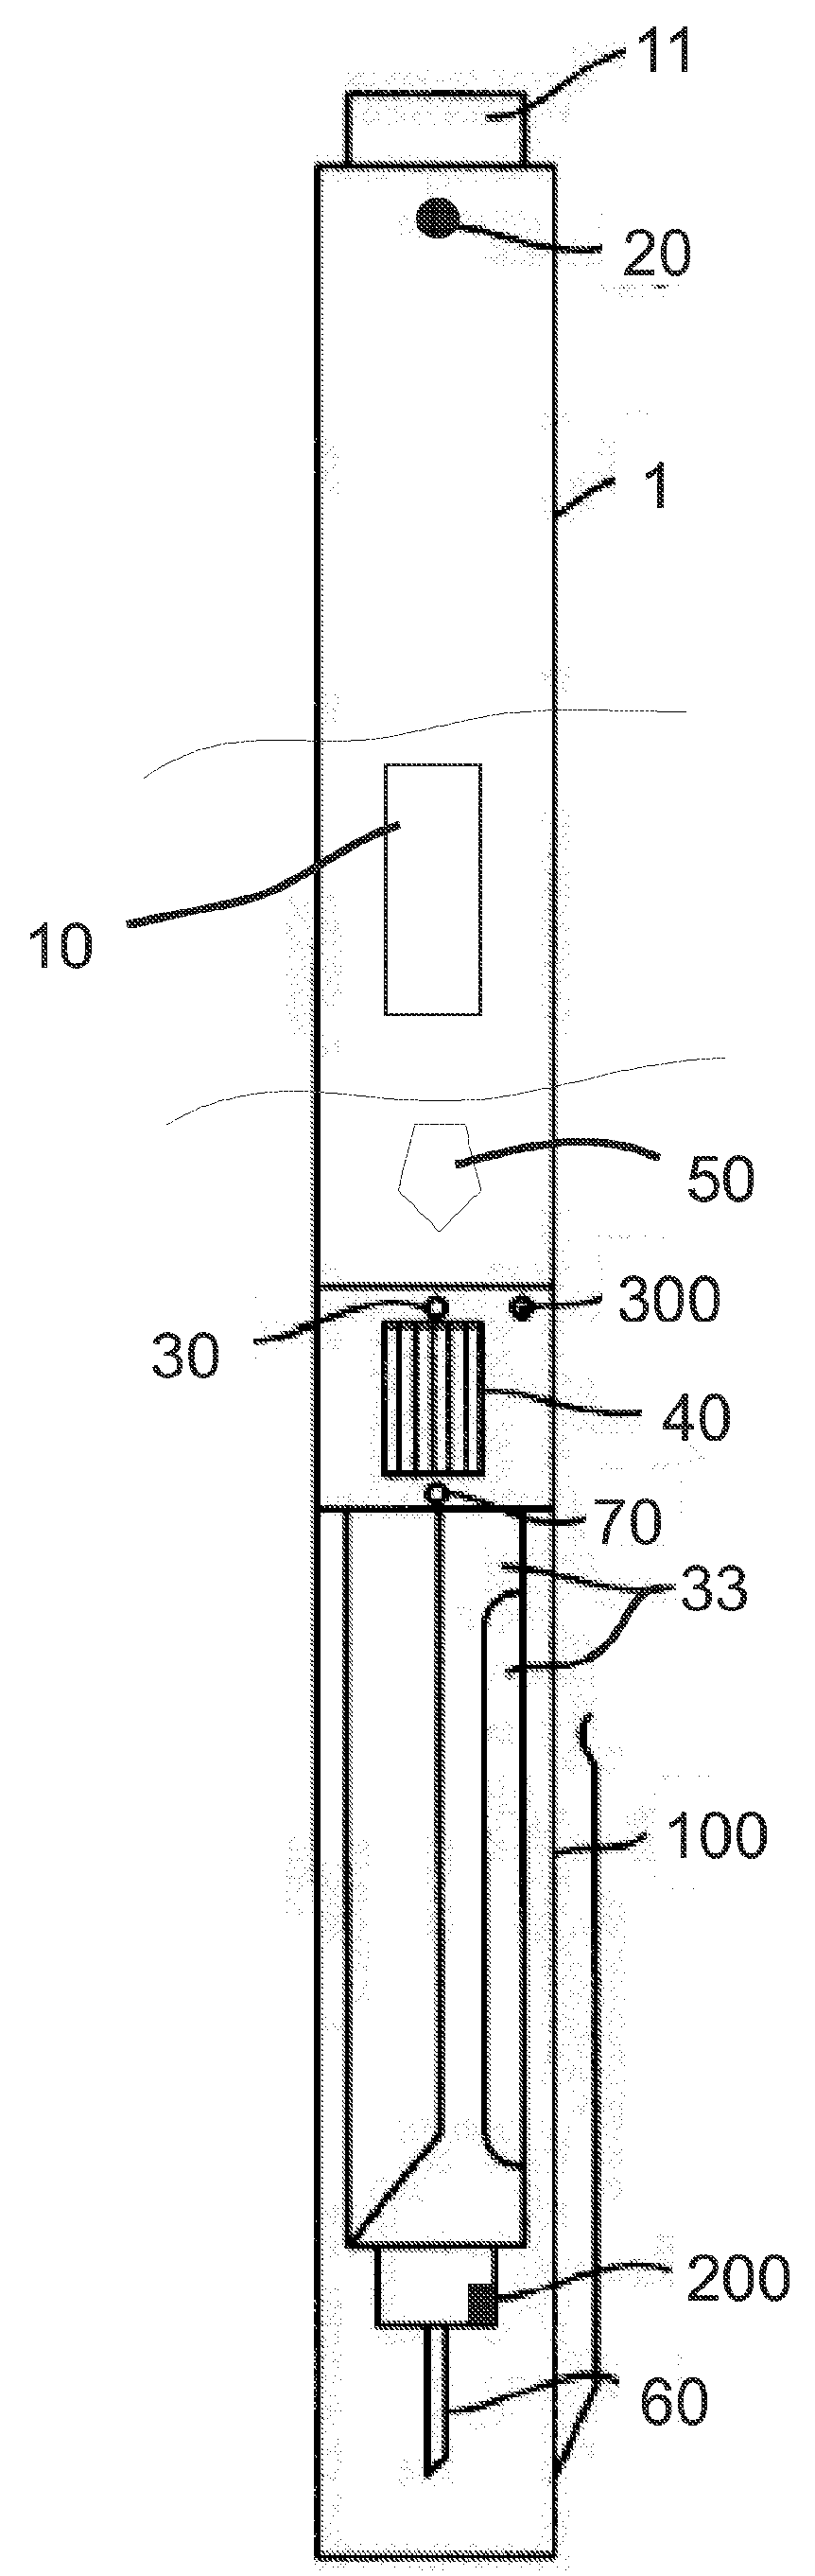 Method and Apparatus For Assisting Patients In Self-Administration of Medication